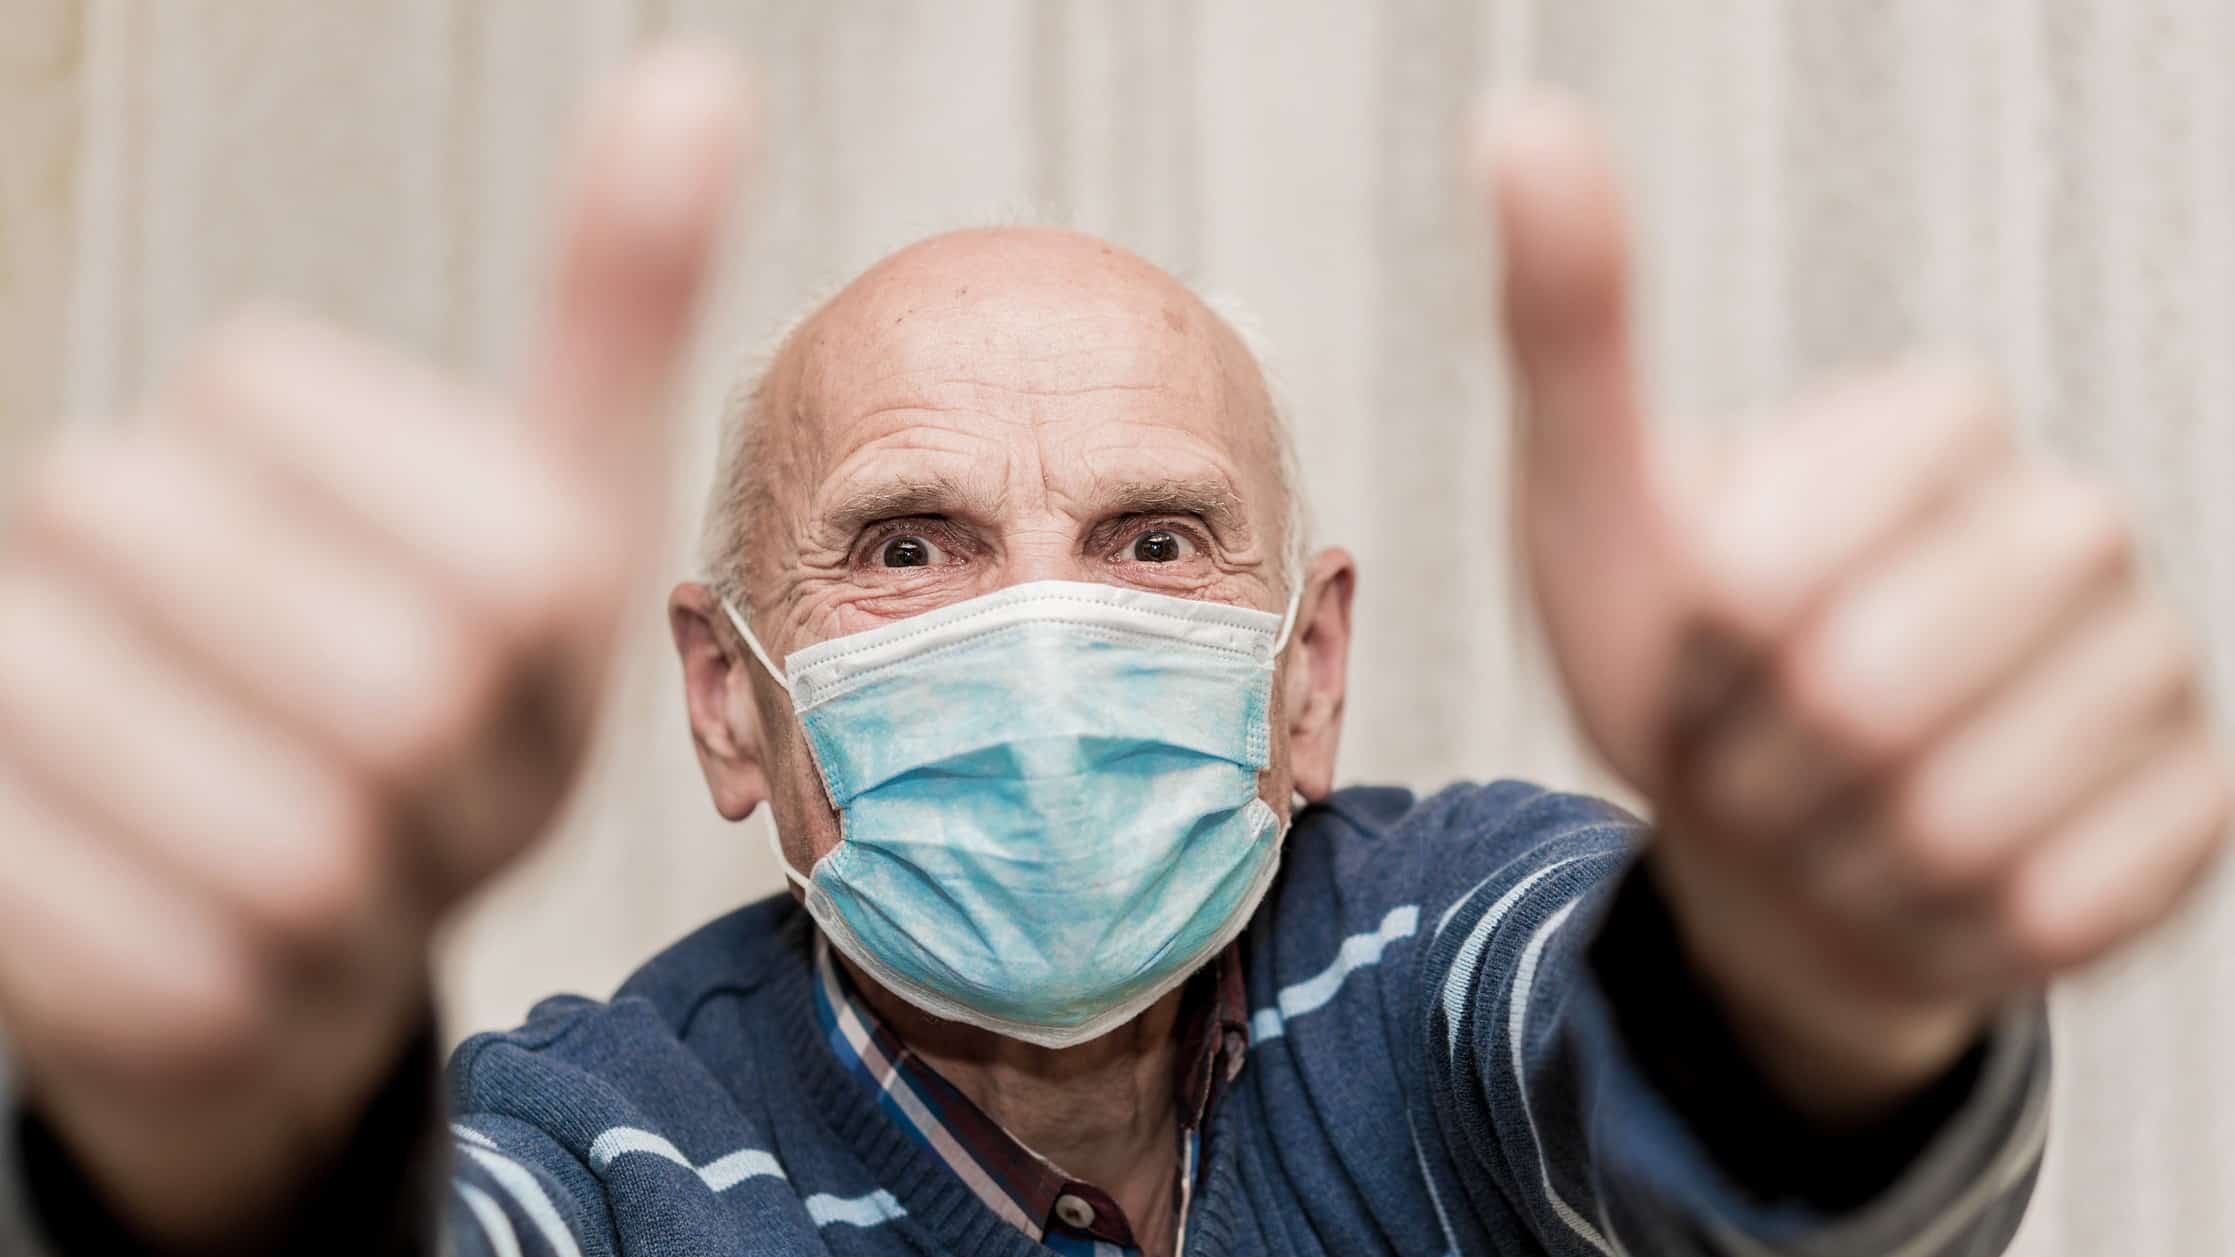 An elderly man wearing a face mask gives an excited double thumbs up.